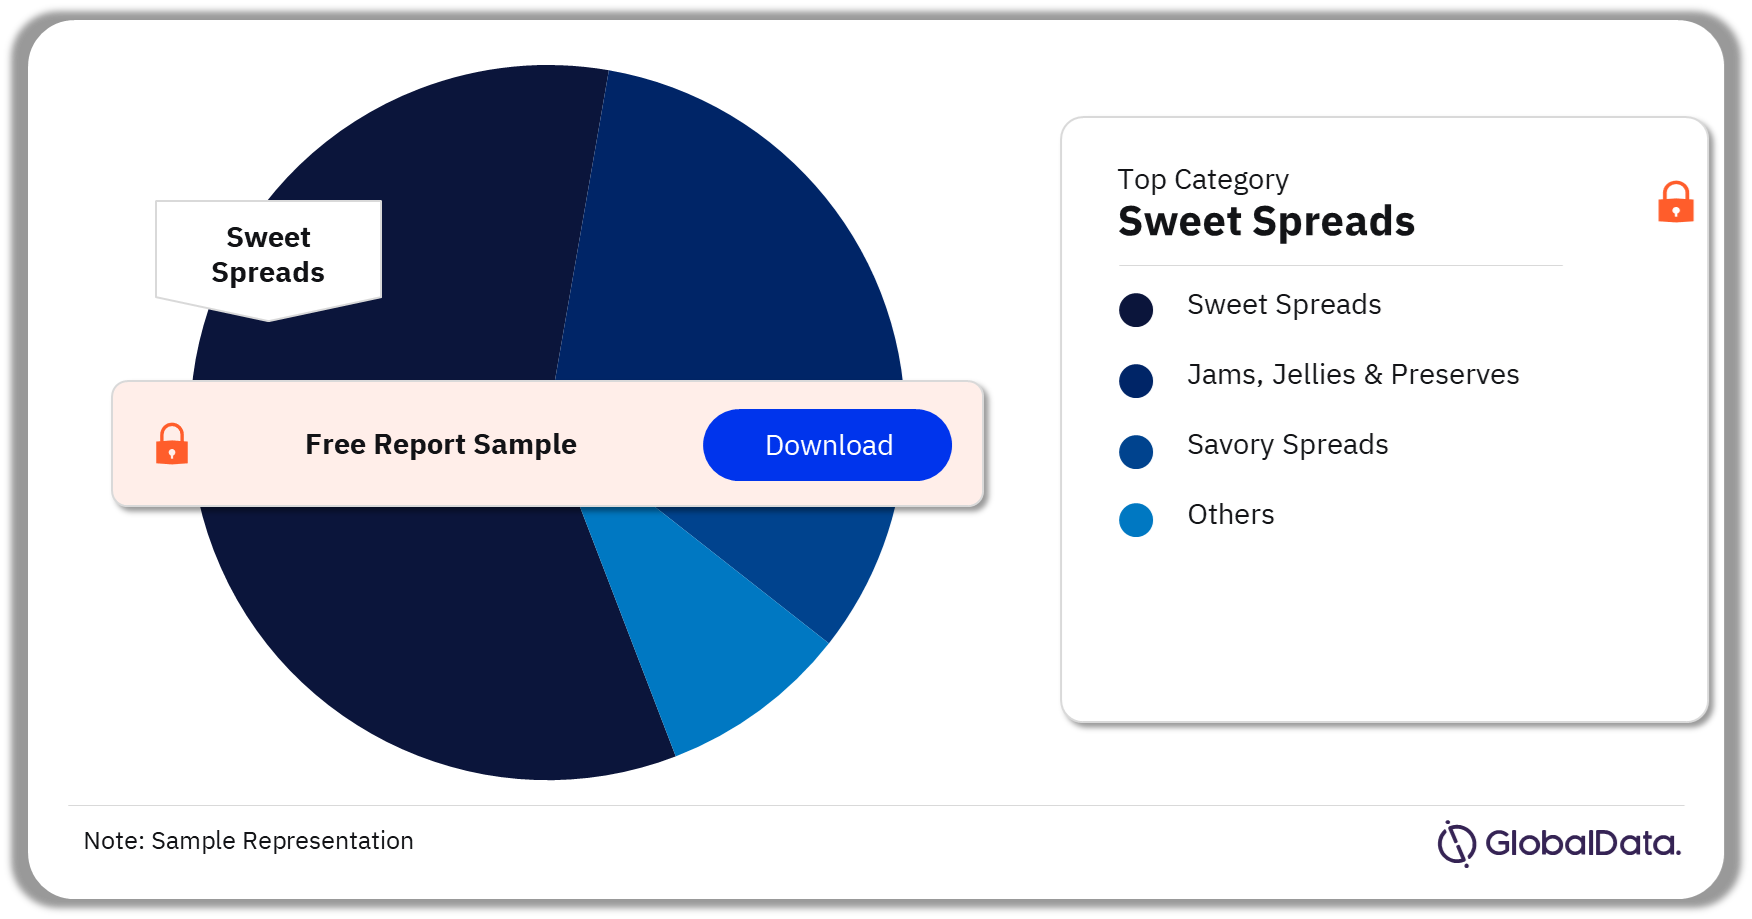 Syrups and Spreads Market Analysis by Category, 2022 (%)